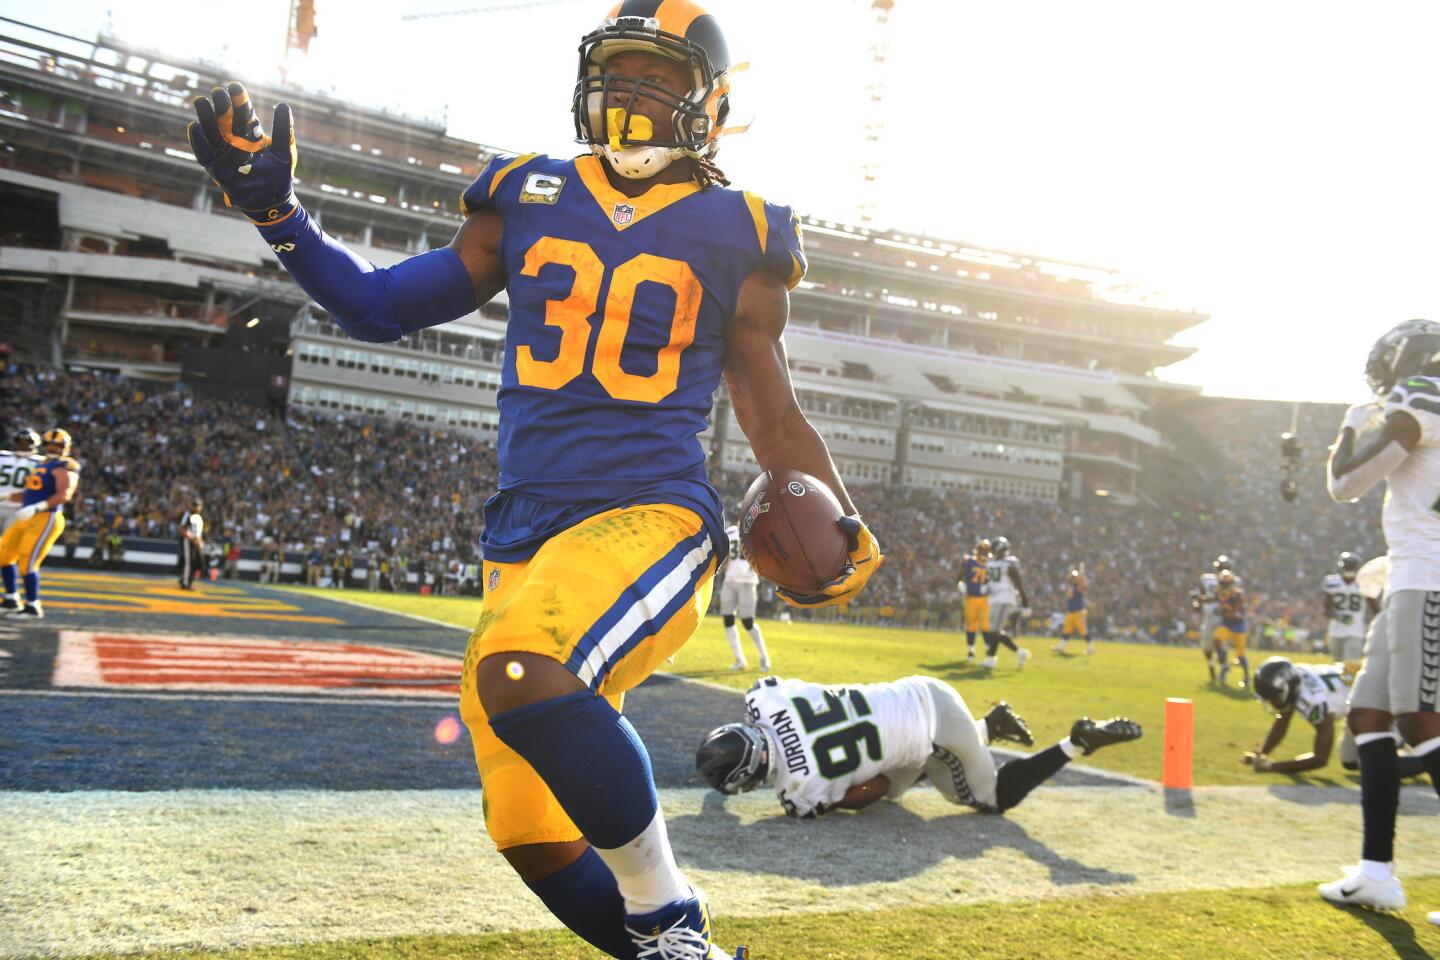 Rams running back Todd Gurley scores a touchdown in front of Seattle Seahawks defensive end Dion Jordan in the second quarter at the Coliseum on Sunday.